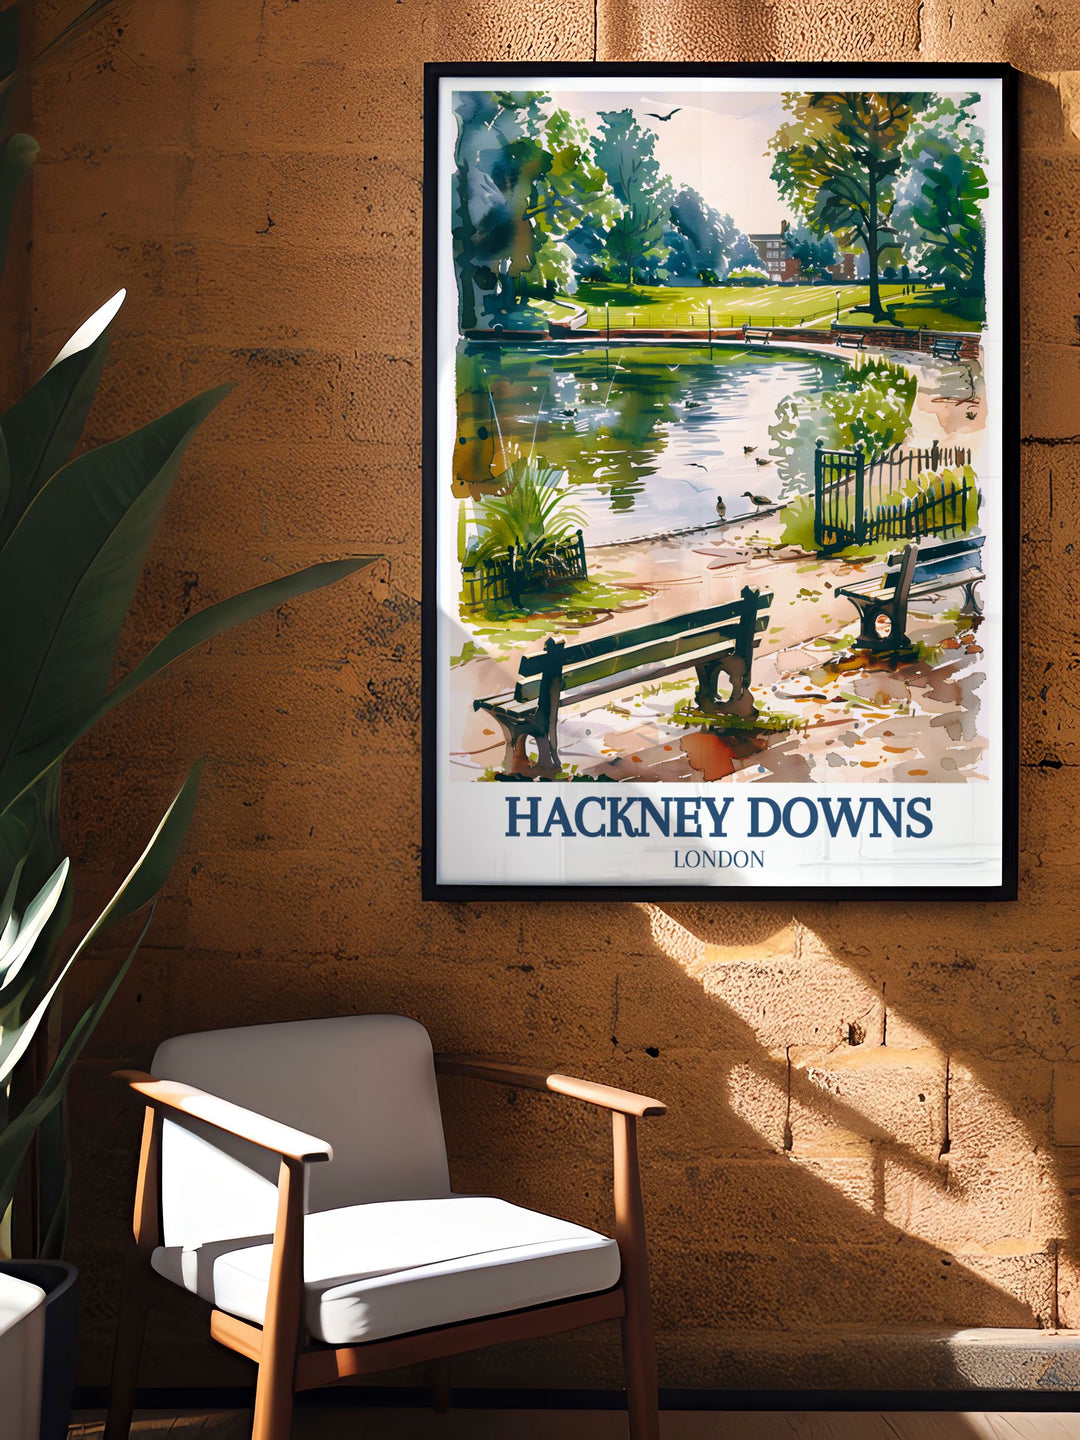 An intricate depiction of Hackney Downs Park, this art print showcases the vibrant community life and natural beauty of one of Londons beloved parks, bringing the charm of East London into your living space.